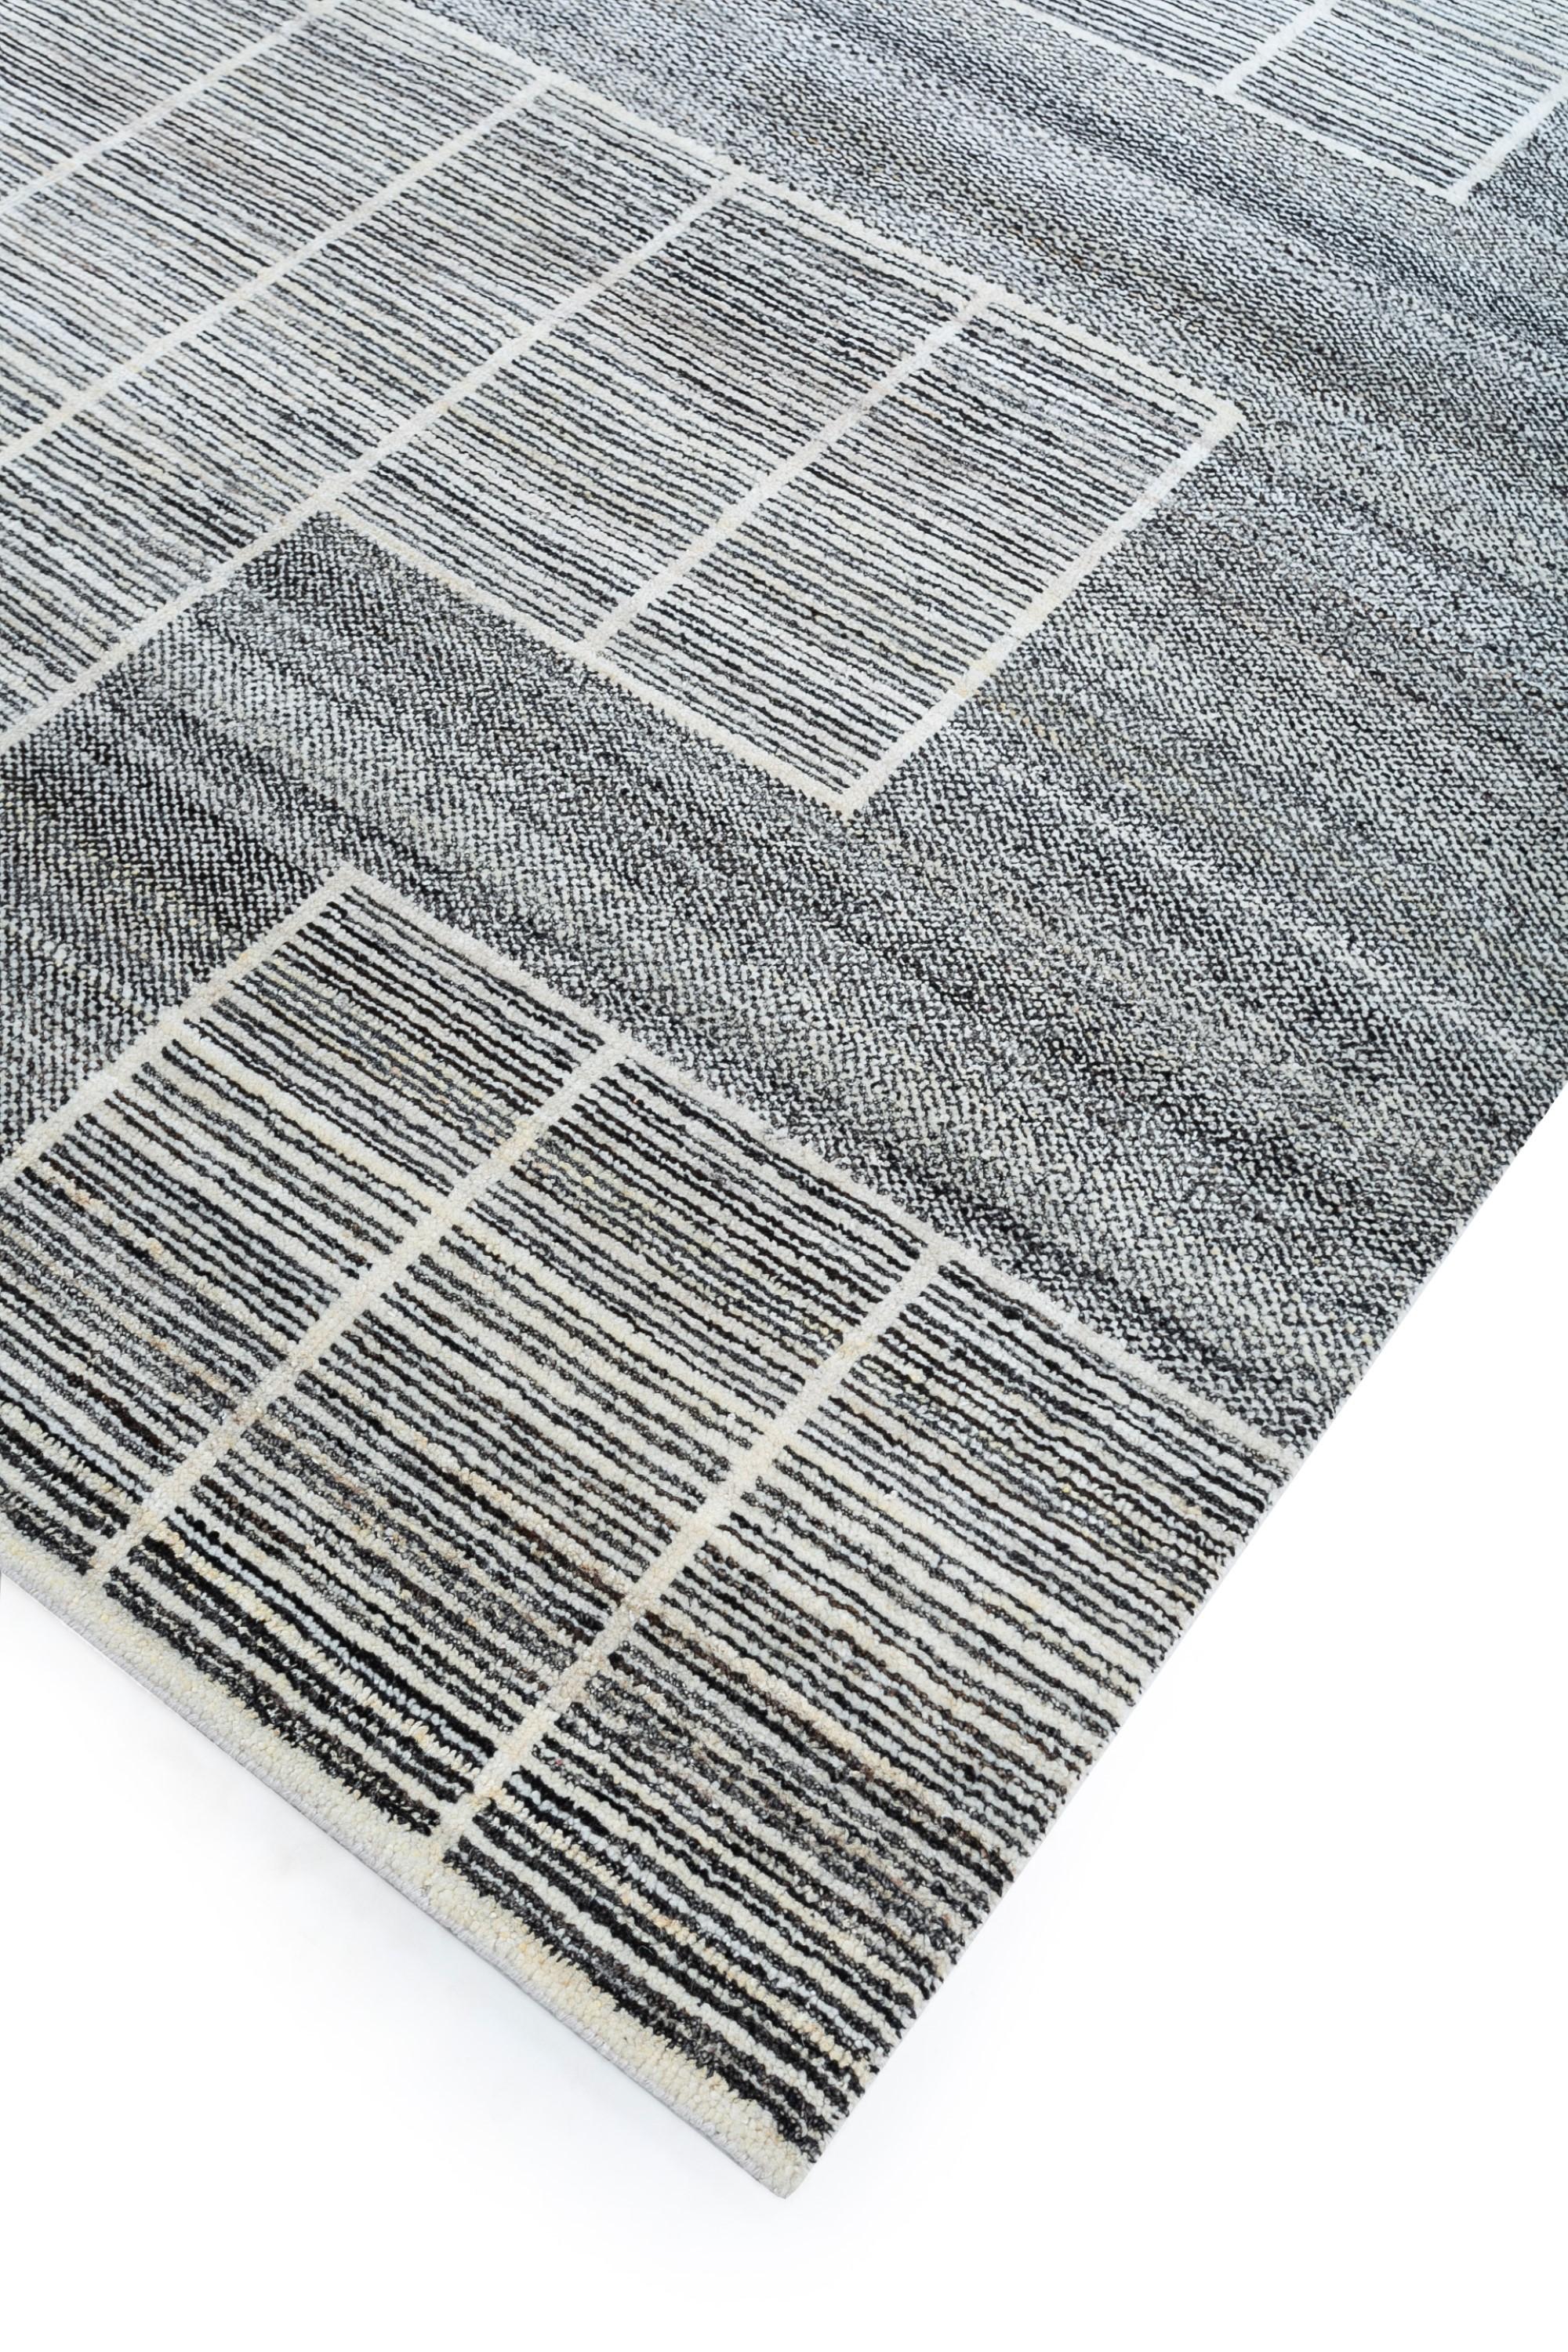 Modern Linear Alabaster Natural White & Caviar 240X300 cm Hand Knotted Rug For Sale